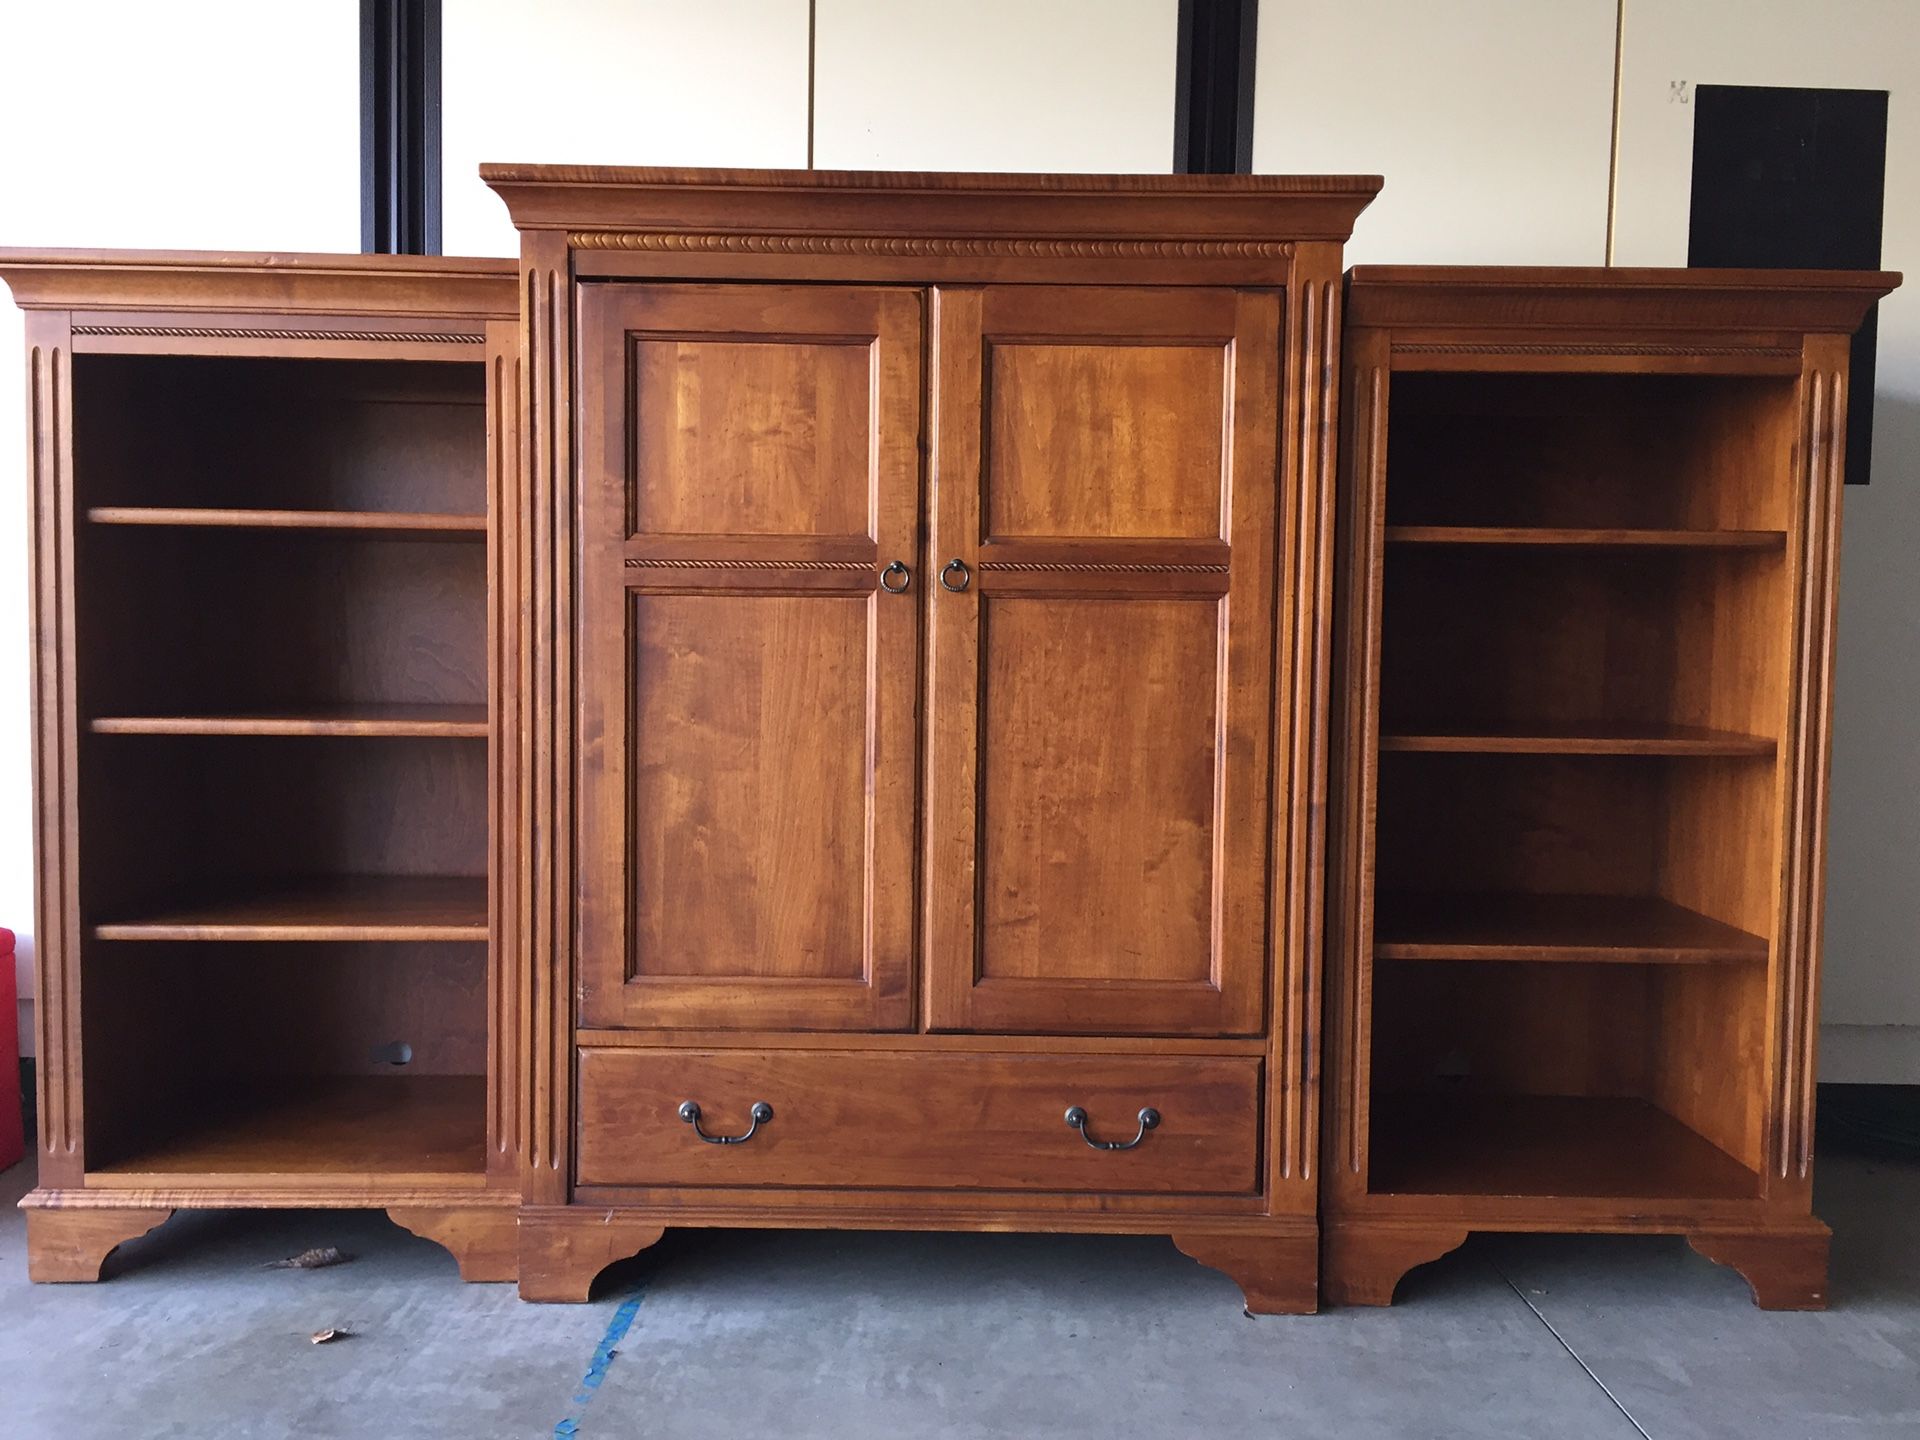 Ethan Allen TV Stand / TV cabinet and bookshelves